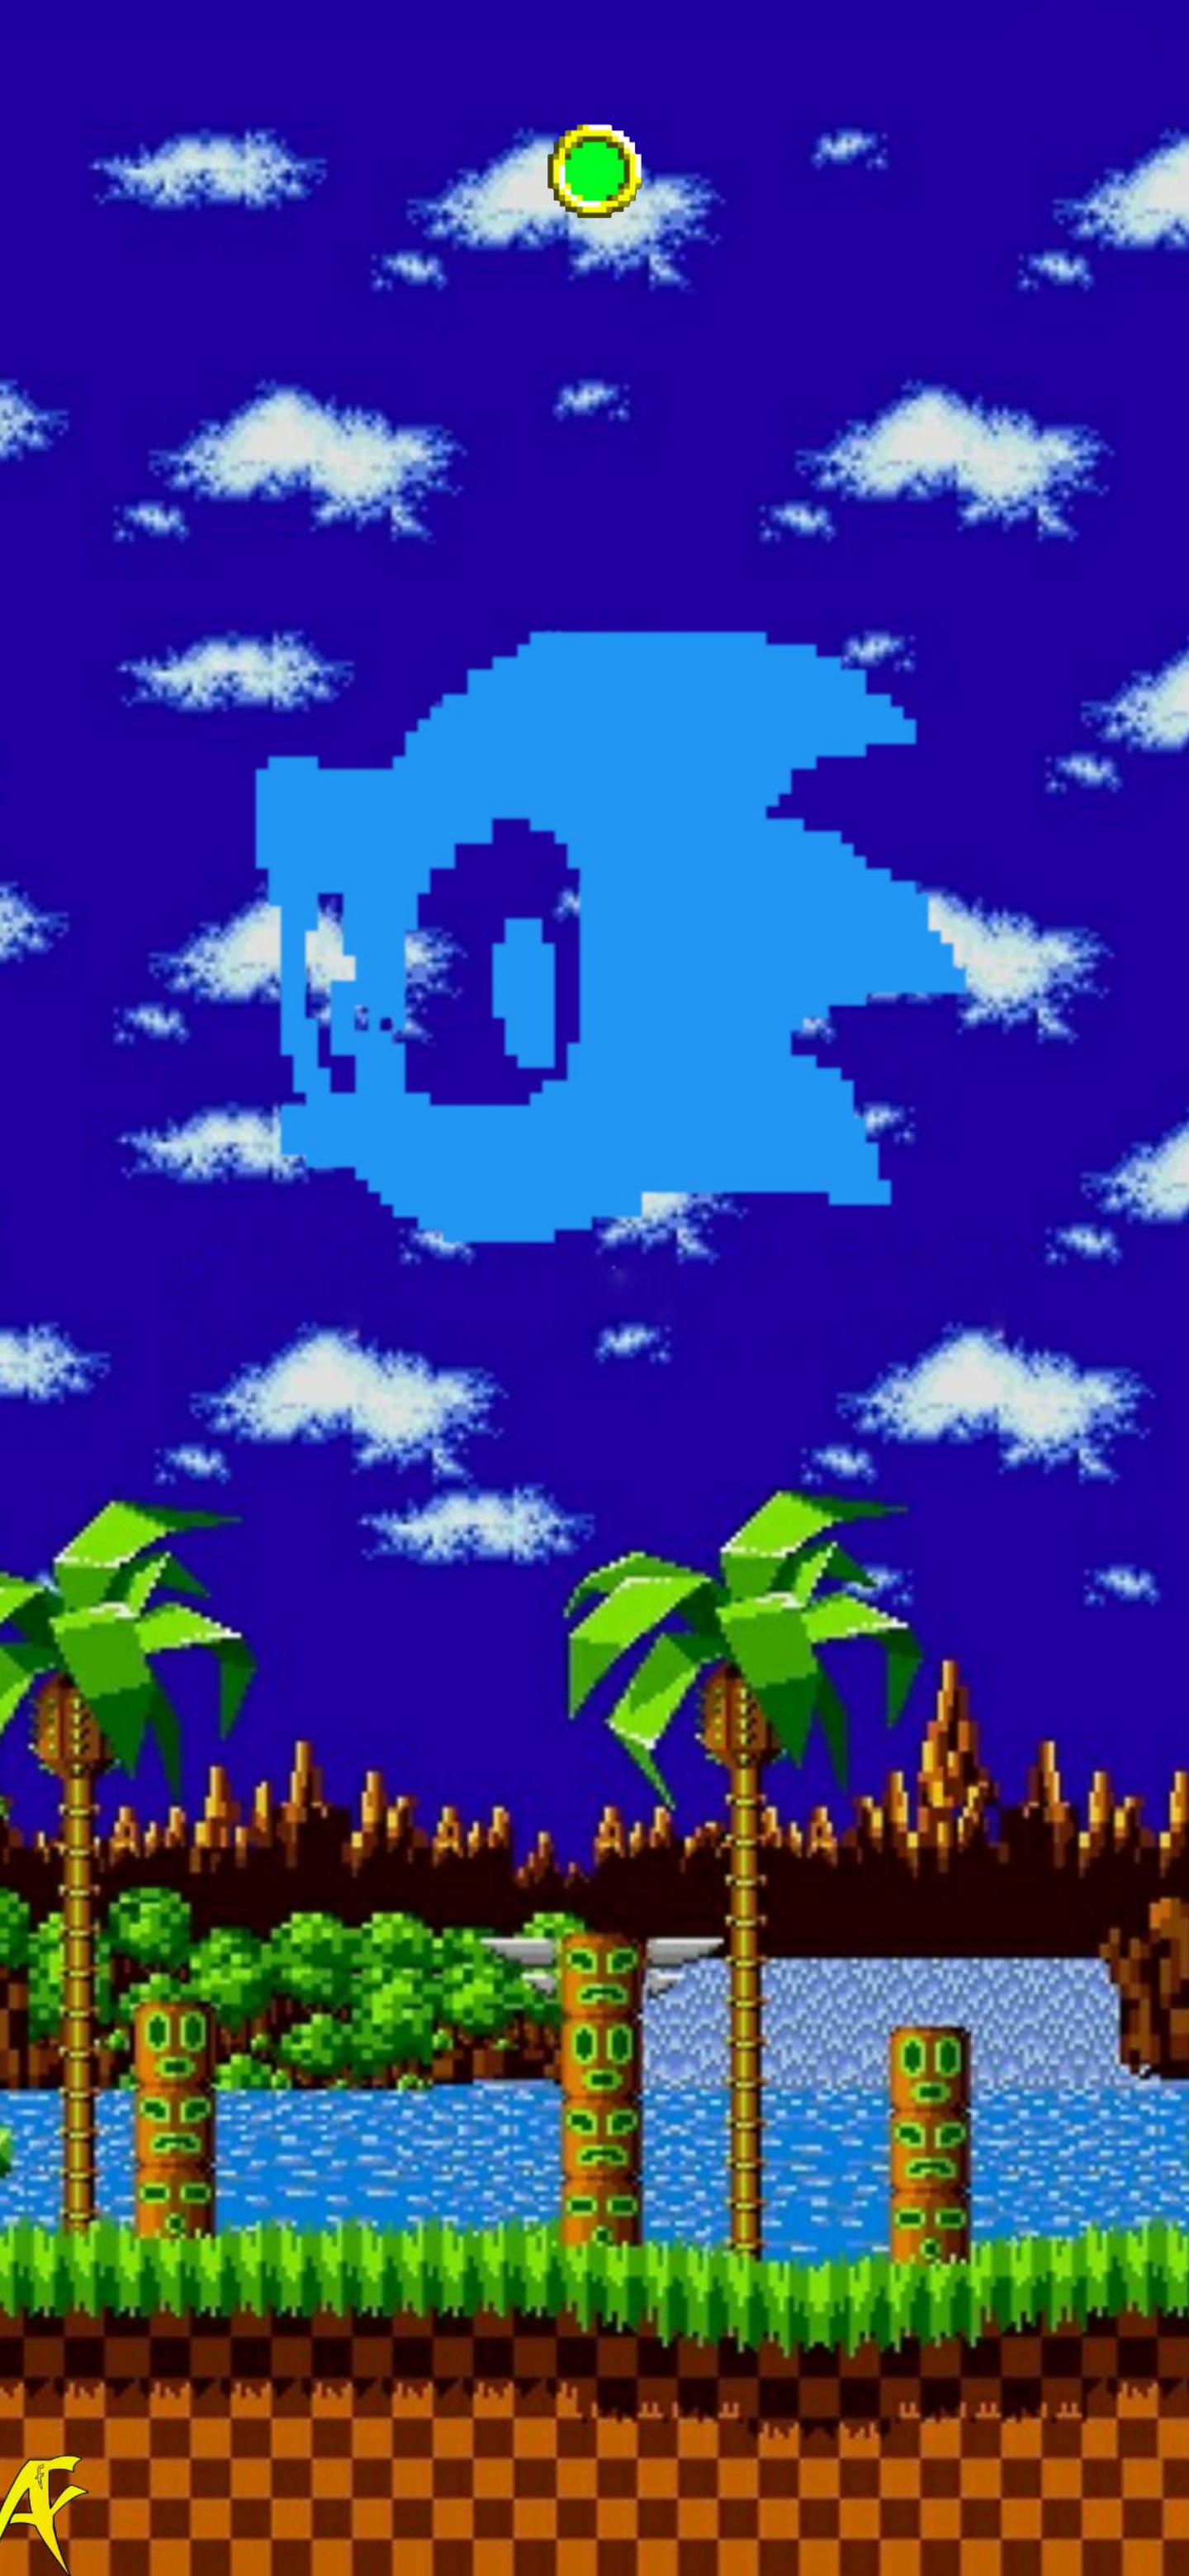 Green Hill Zone from Sonic the Hedgehog